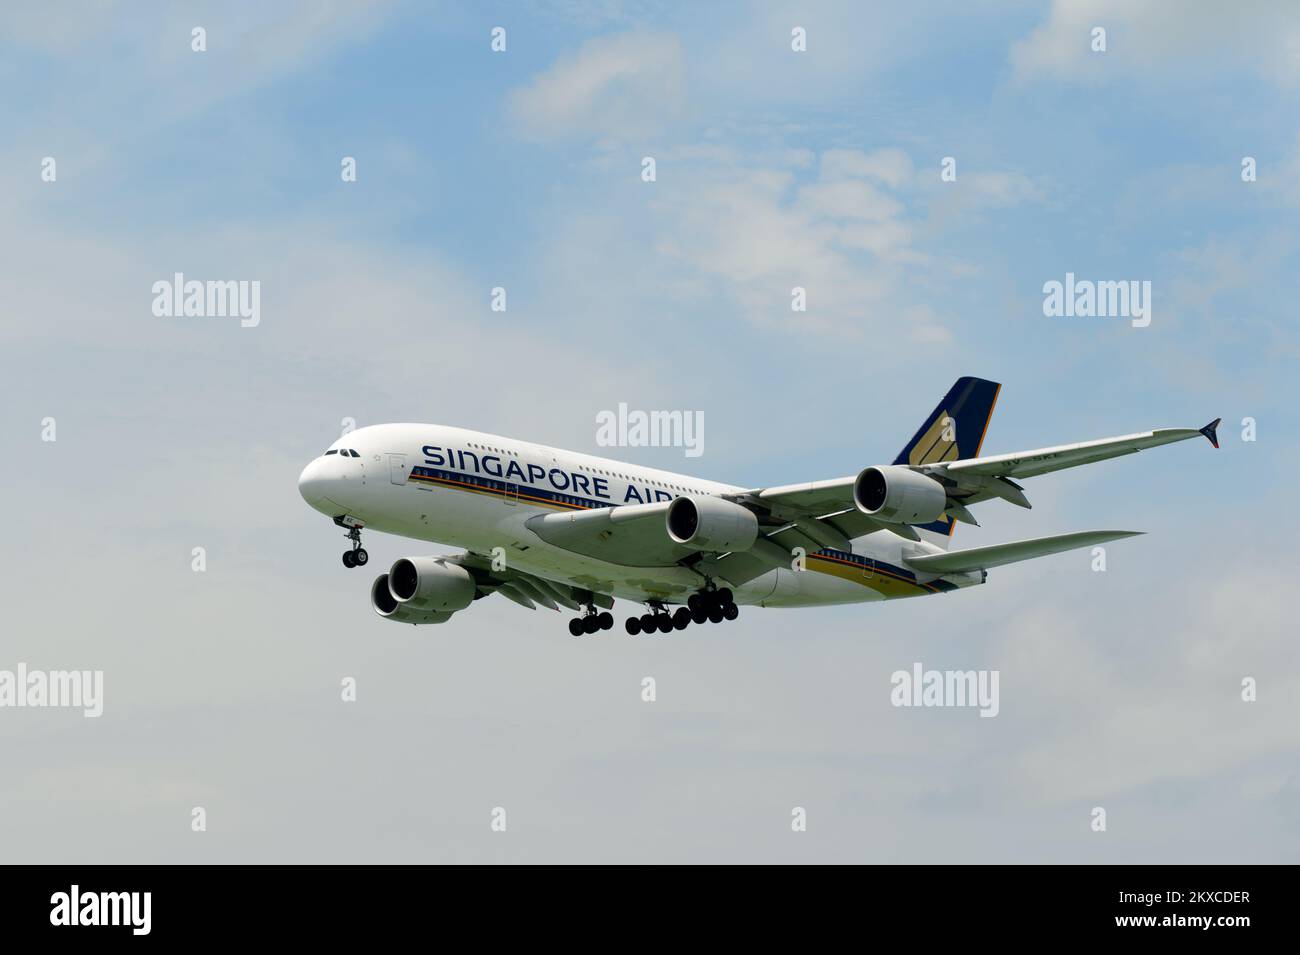 HONG KONG - JUNE 04, 2015: Singapore Airlanes aircraft landing. Singapore Airlines Limited is the flag carrier of Singapore which operates from its hu Stock Photo